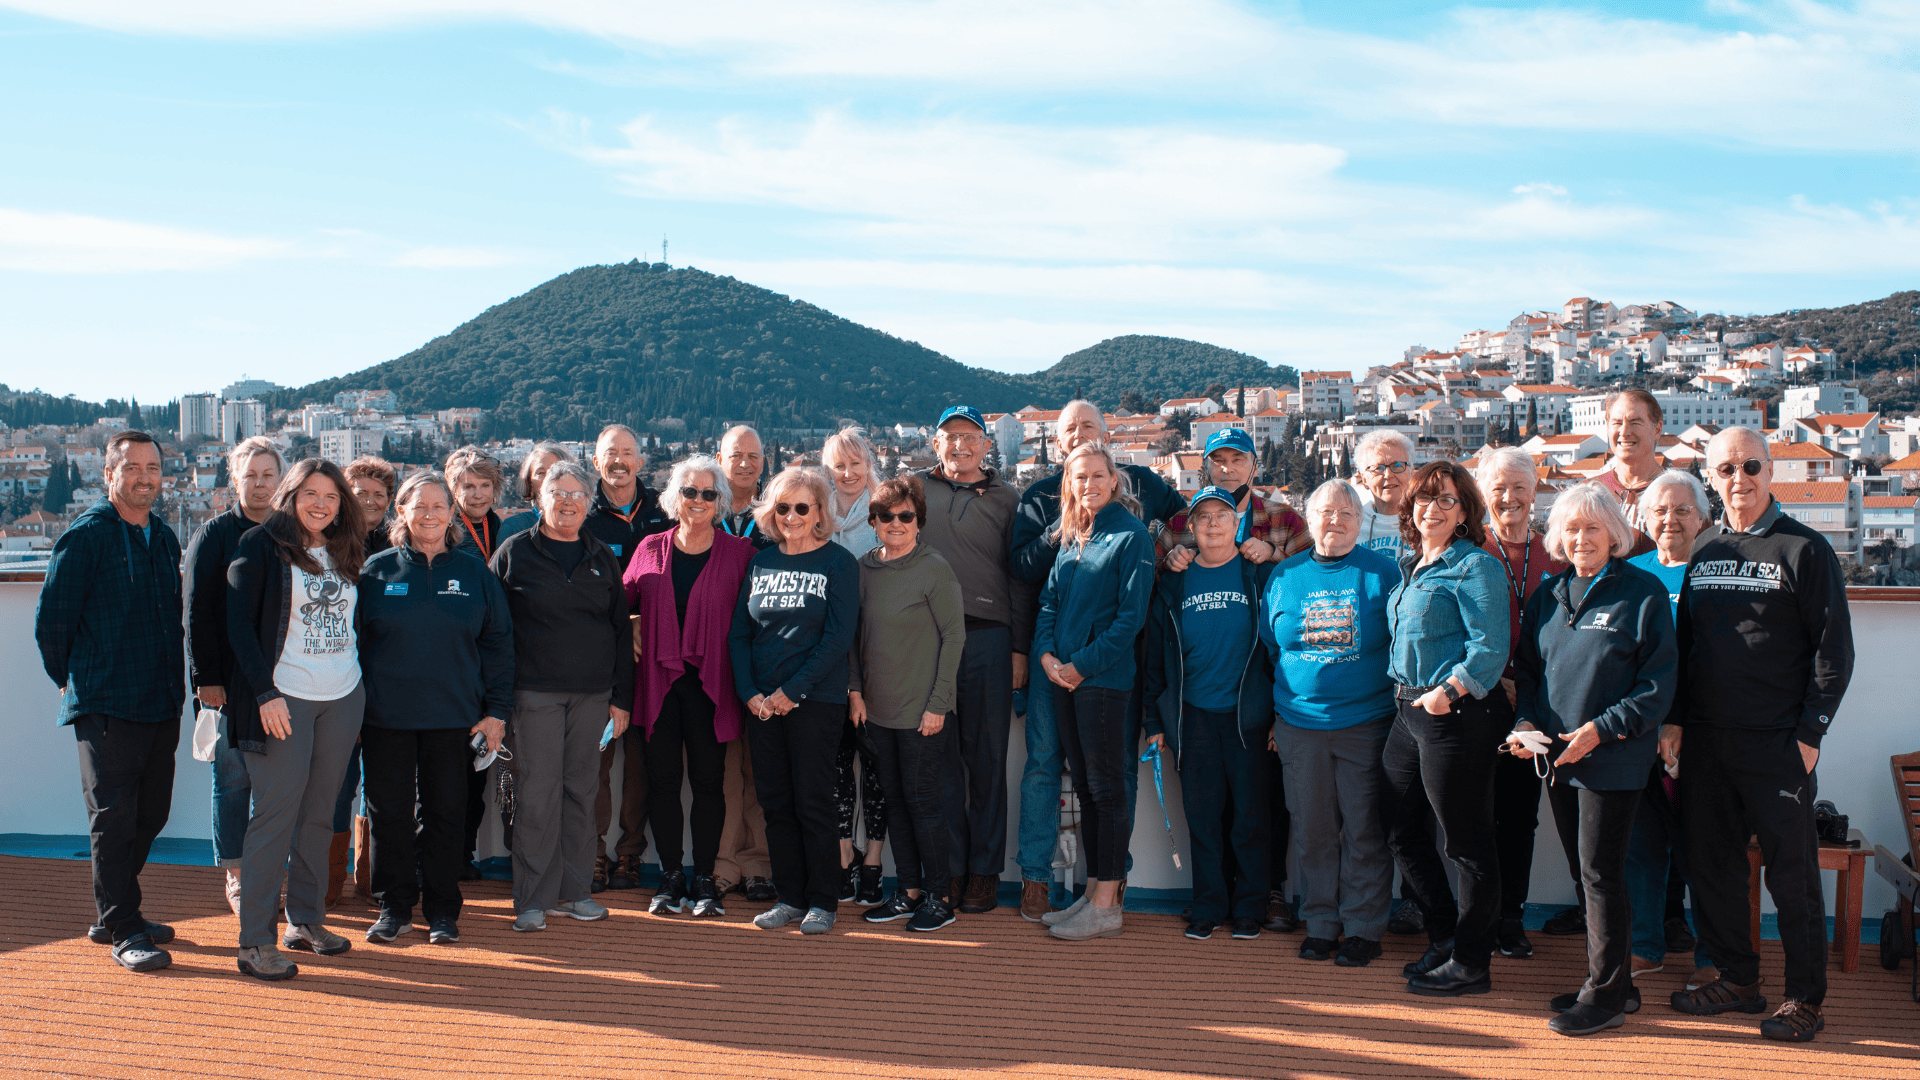 Lifelong Learners pose for group photo on SP22 Voyage